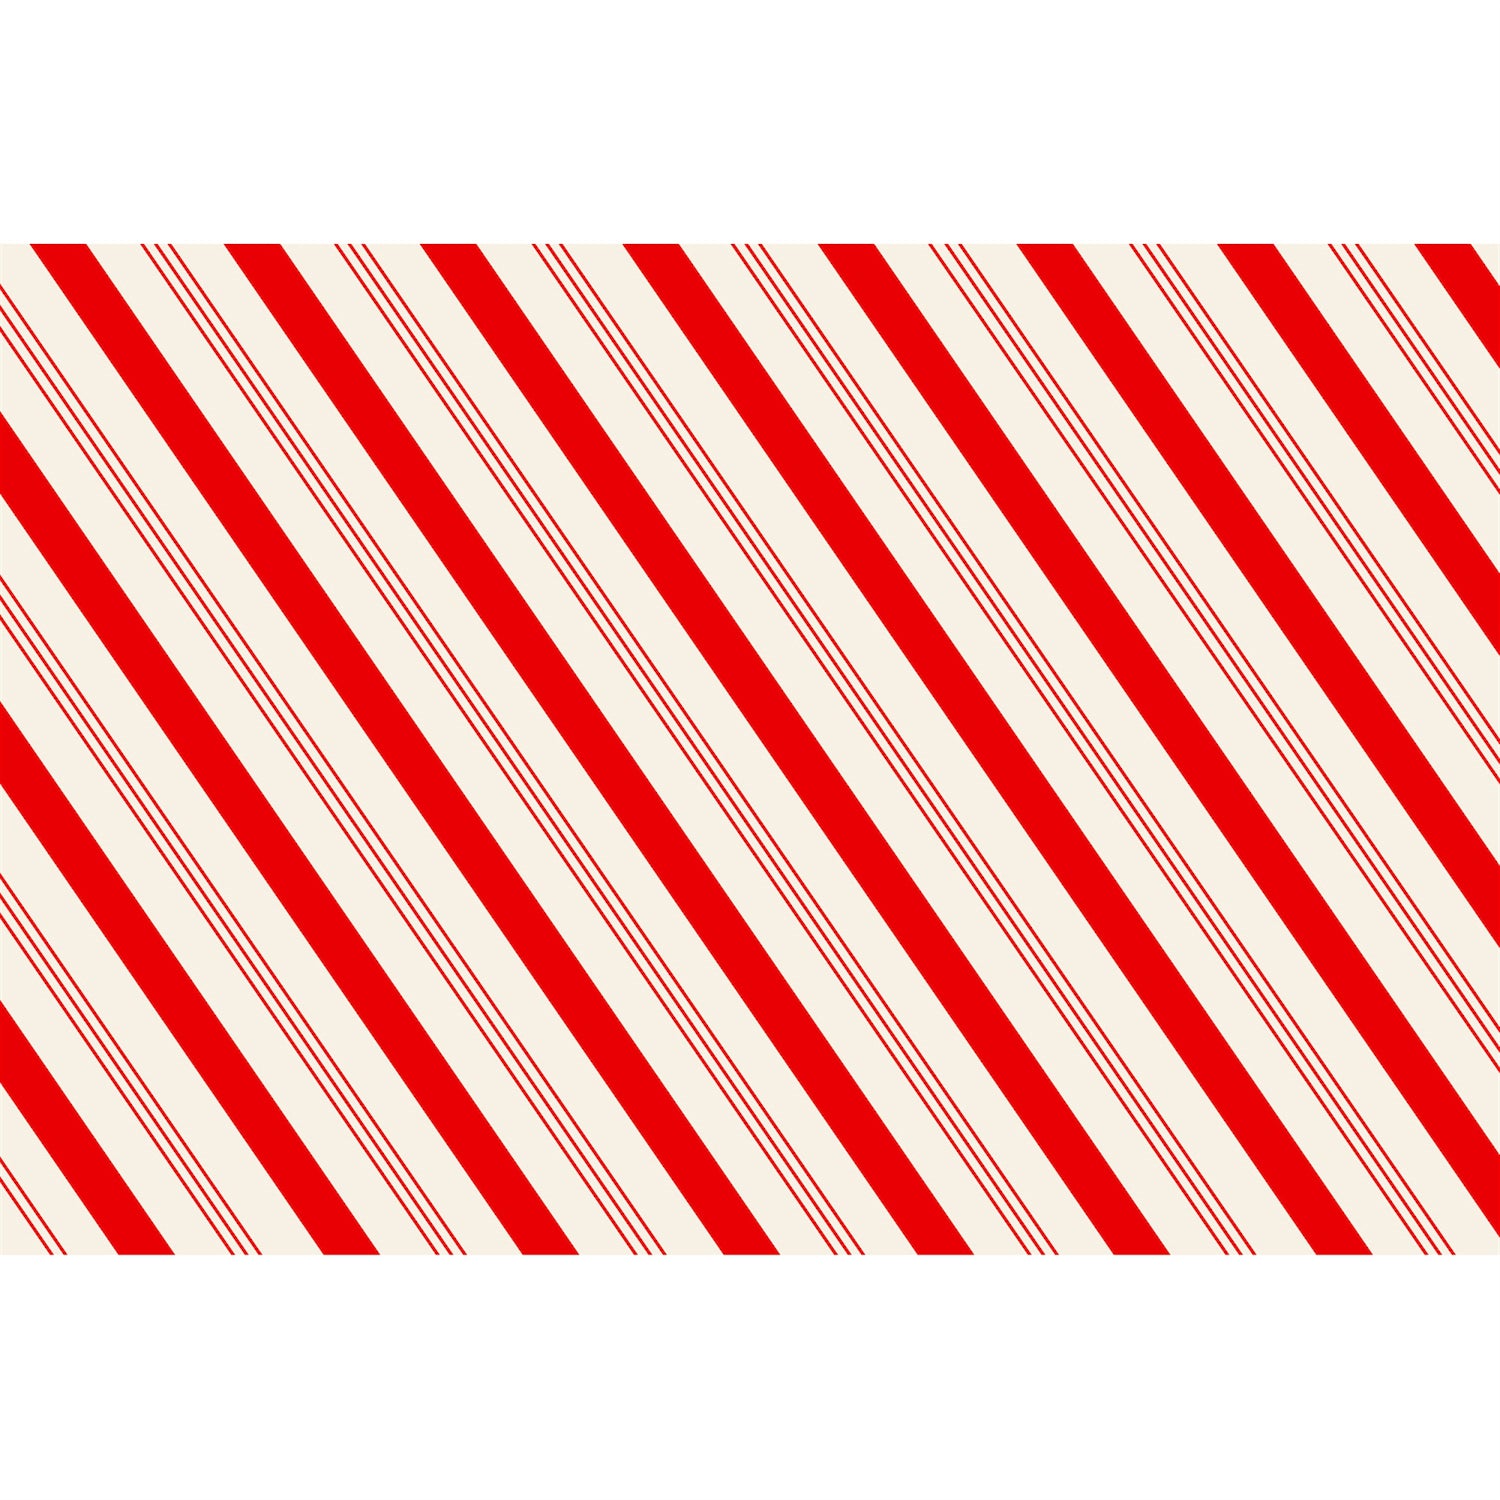 Bright red, diagonal candy cane stripes over white.